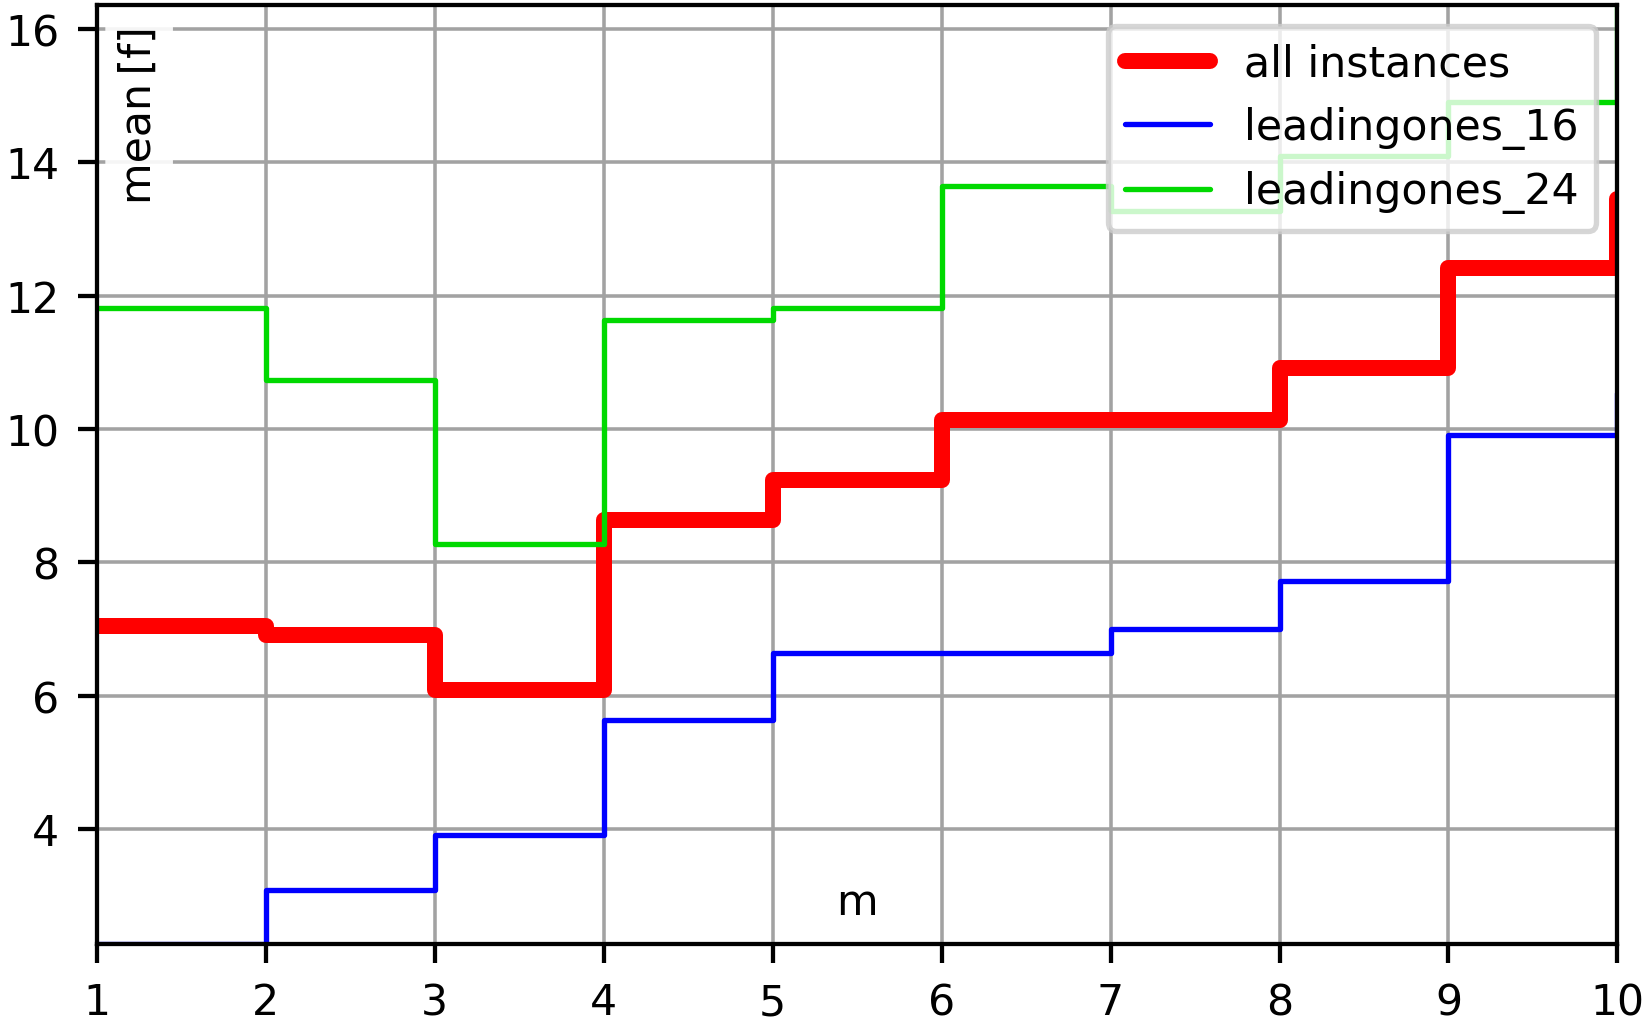 Example for the mean end result quality over the algorithm parameter m of the Bin(m/n) operator plugged into the RLS algorithm on several LeadingOnes instances.